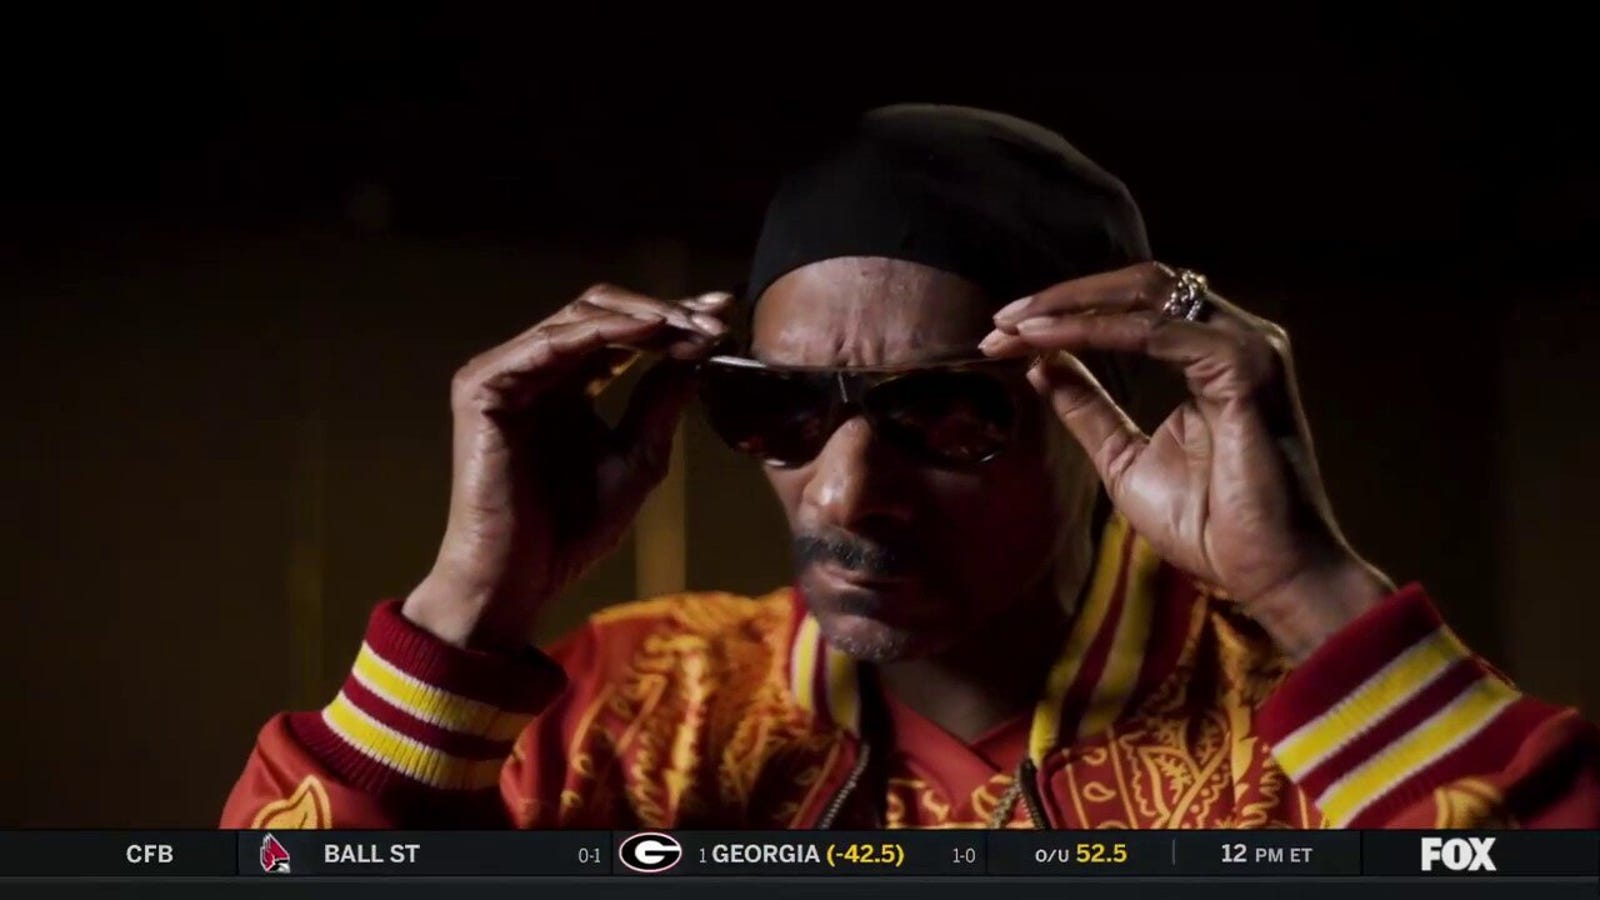 'We was made for this big stage' — Snoop Dogg hypes up Colorado